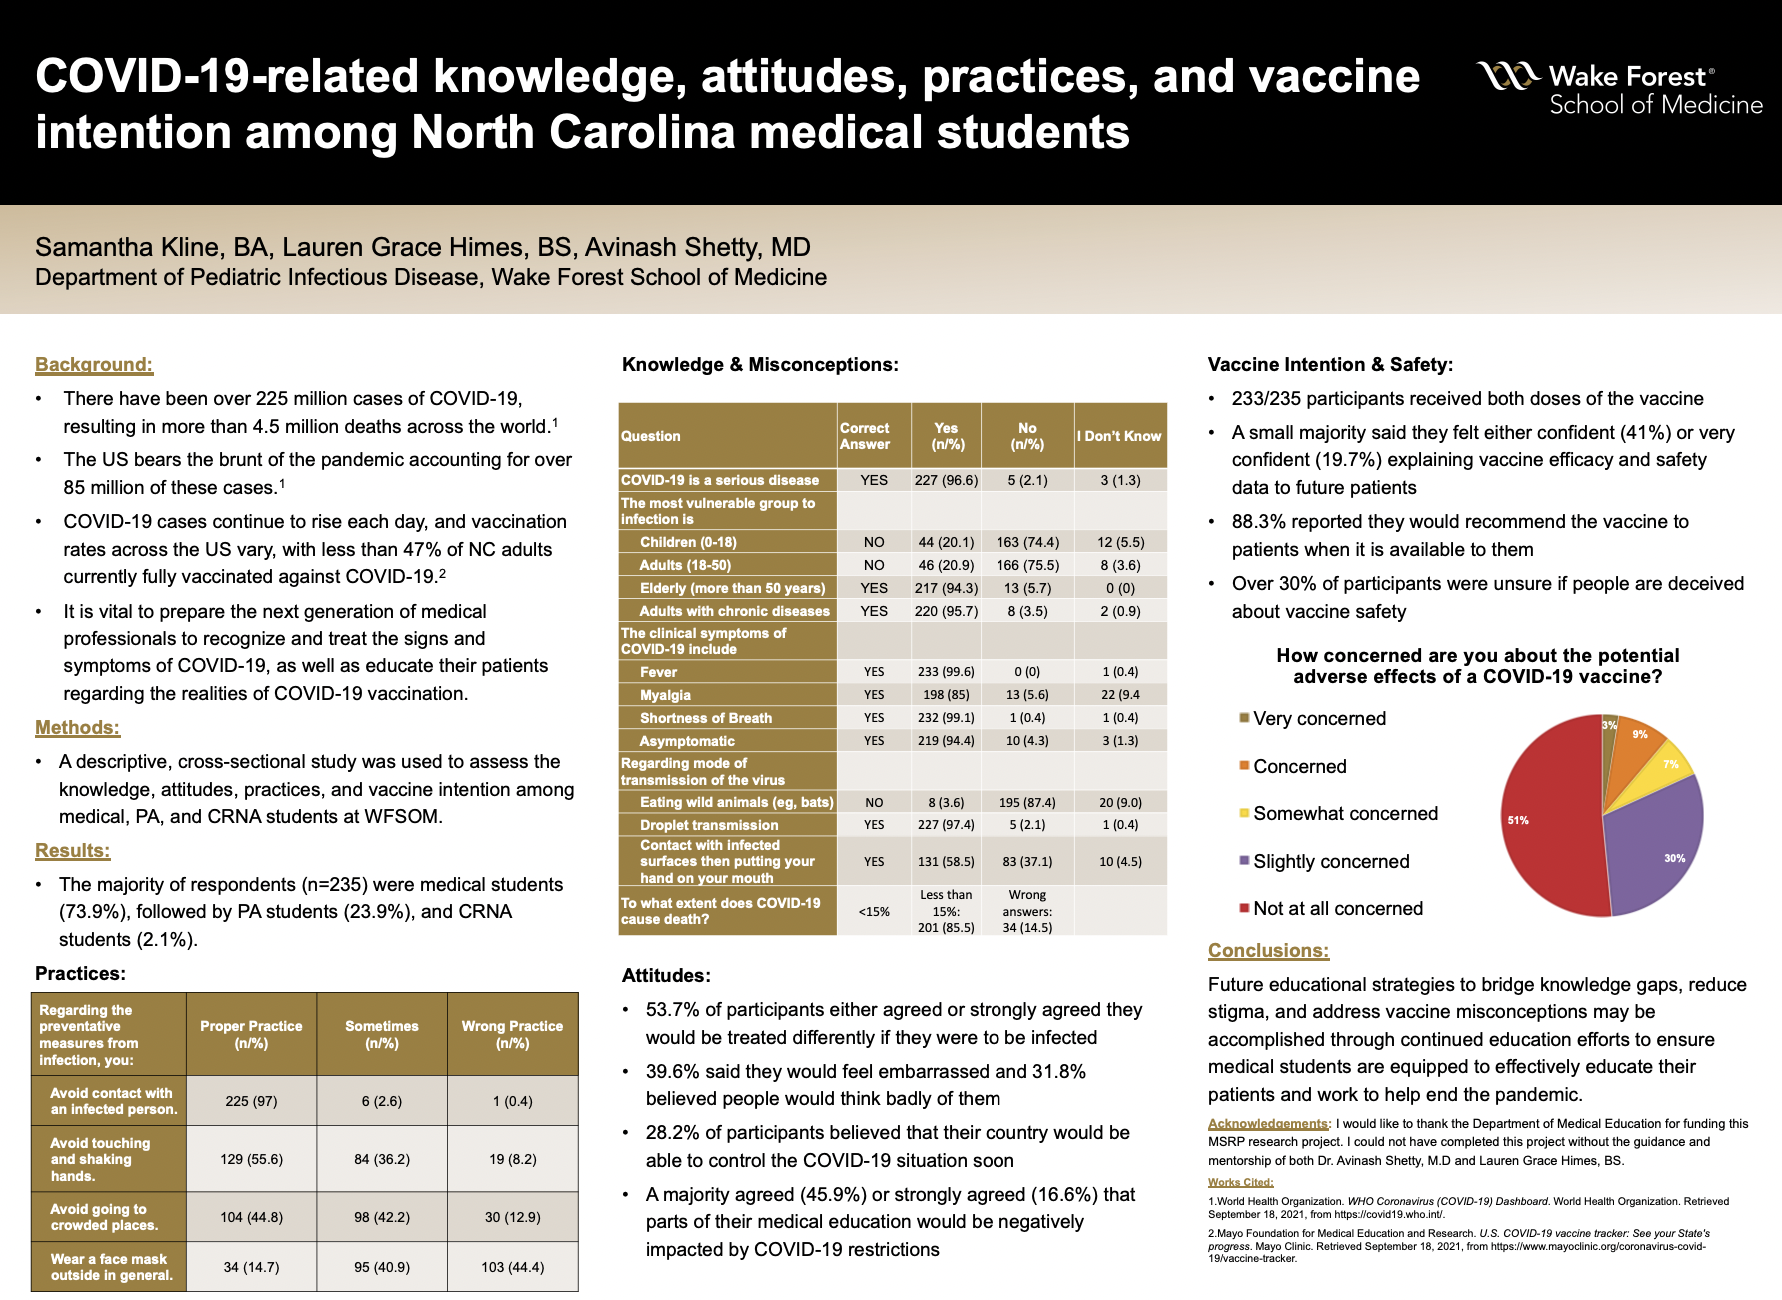 Showcase Image for COVID-19-related knowledge, attitudes, practices, and vaccine intention among North Carolina medical students 